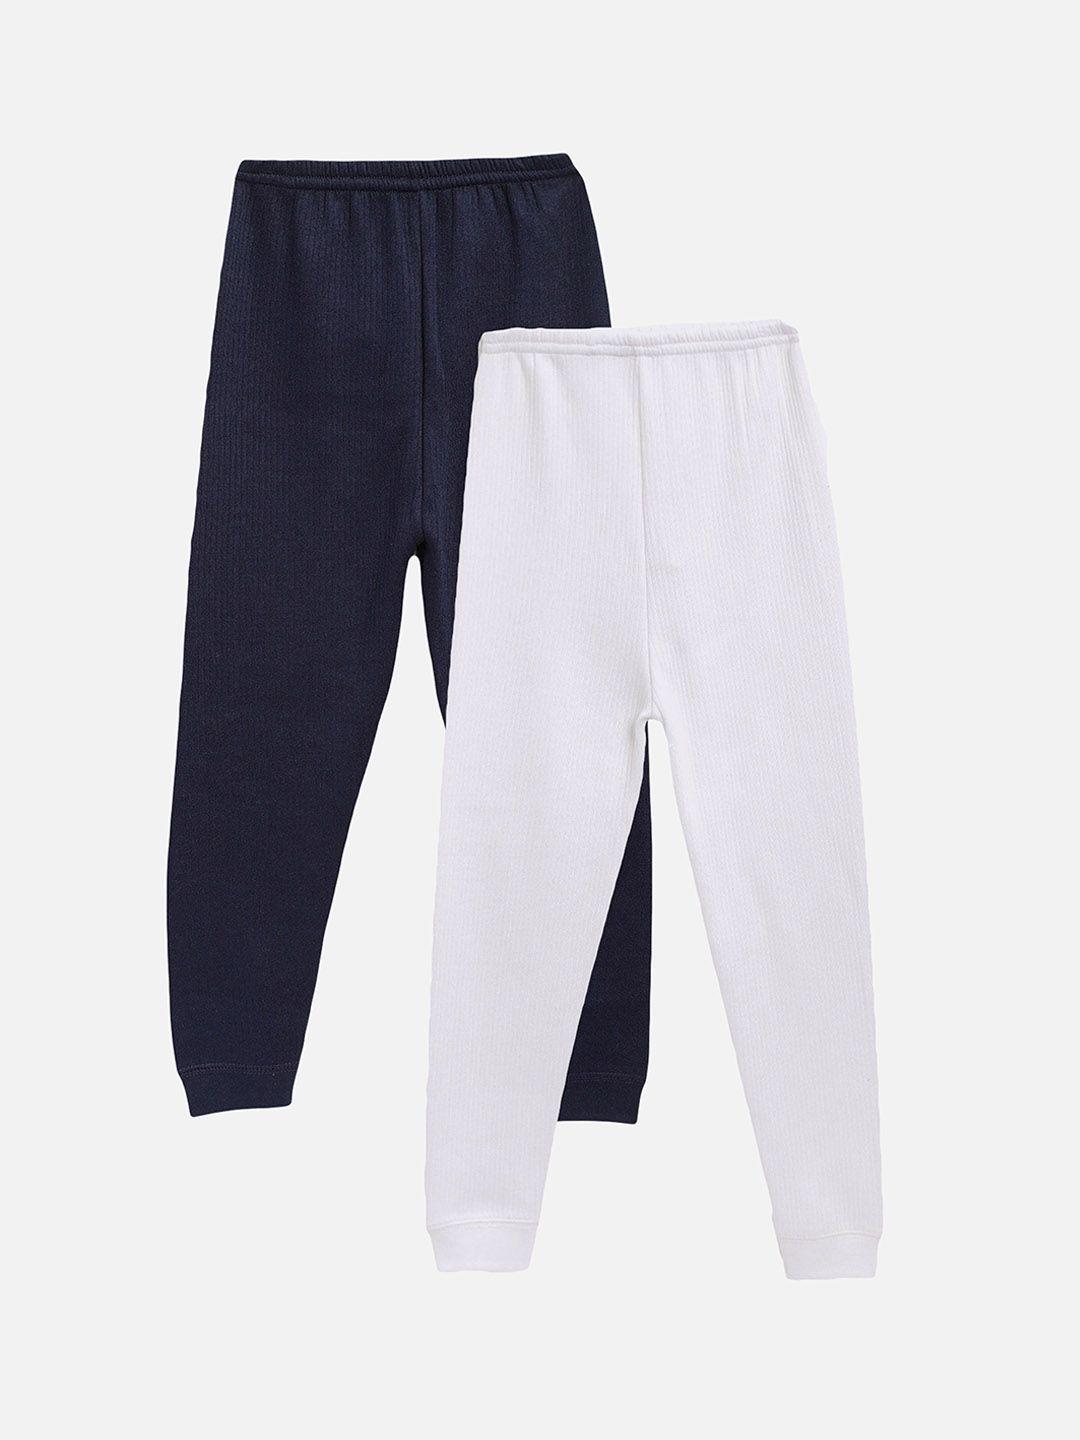 kanvin-boys-pack-of-2-navy-blue-&-white-cotton-thermal-bottoms